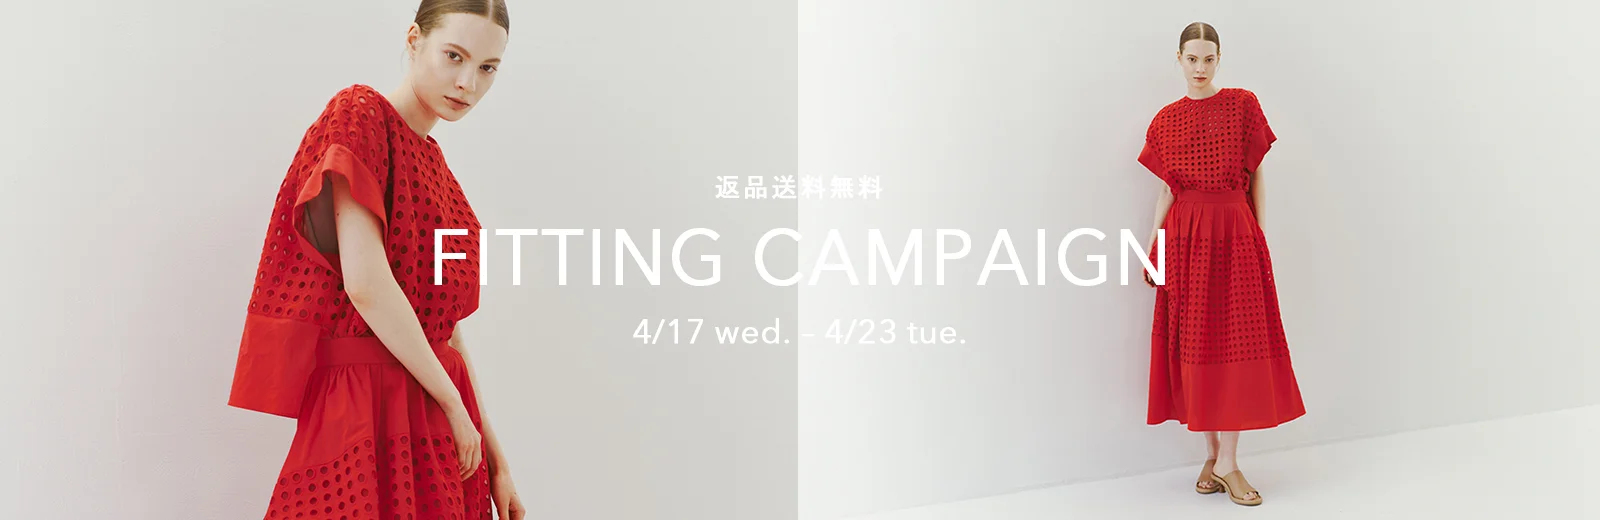 FITTING CAMPAIGN